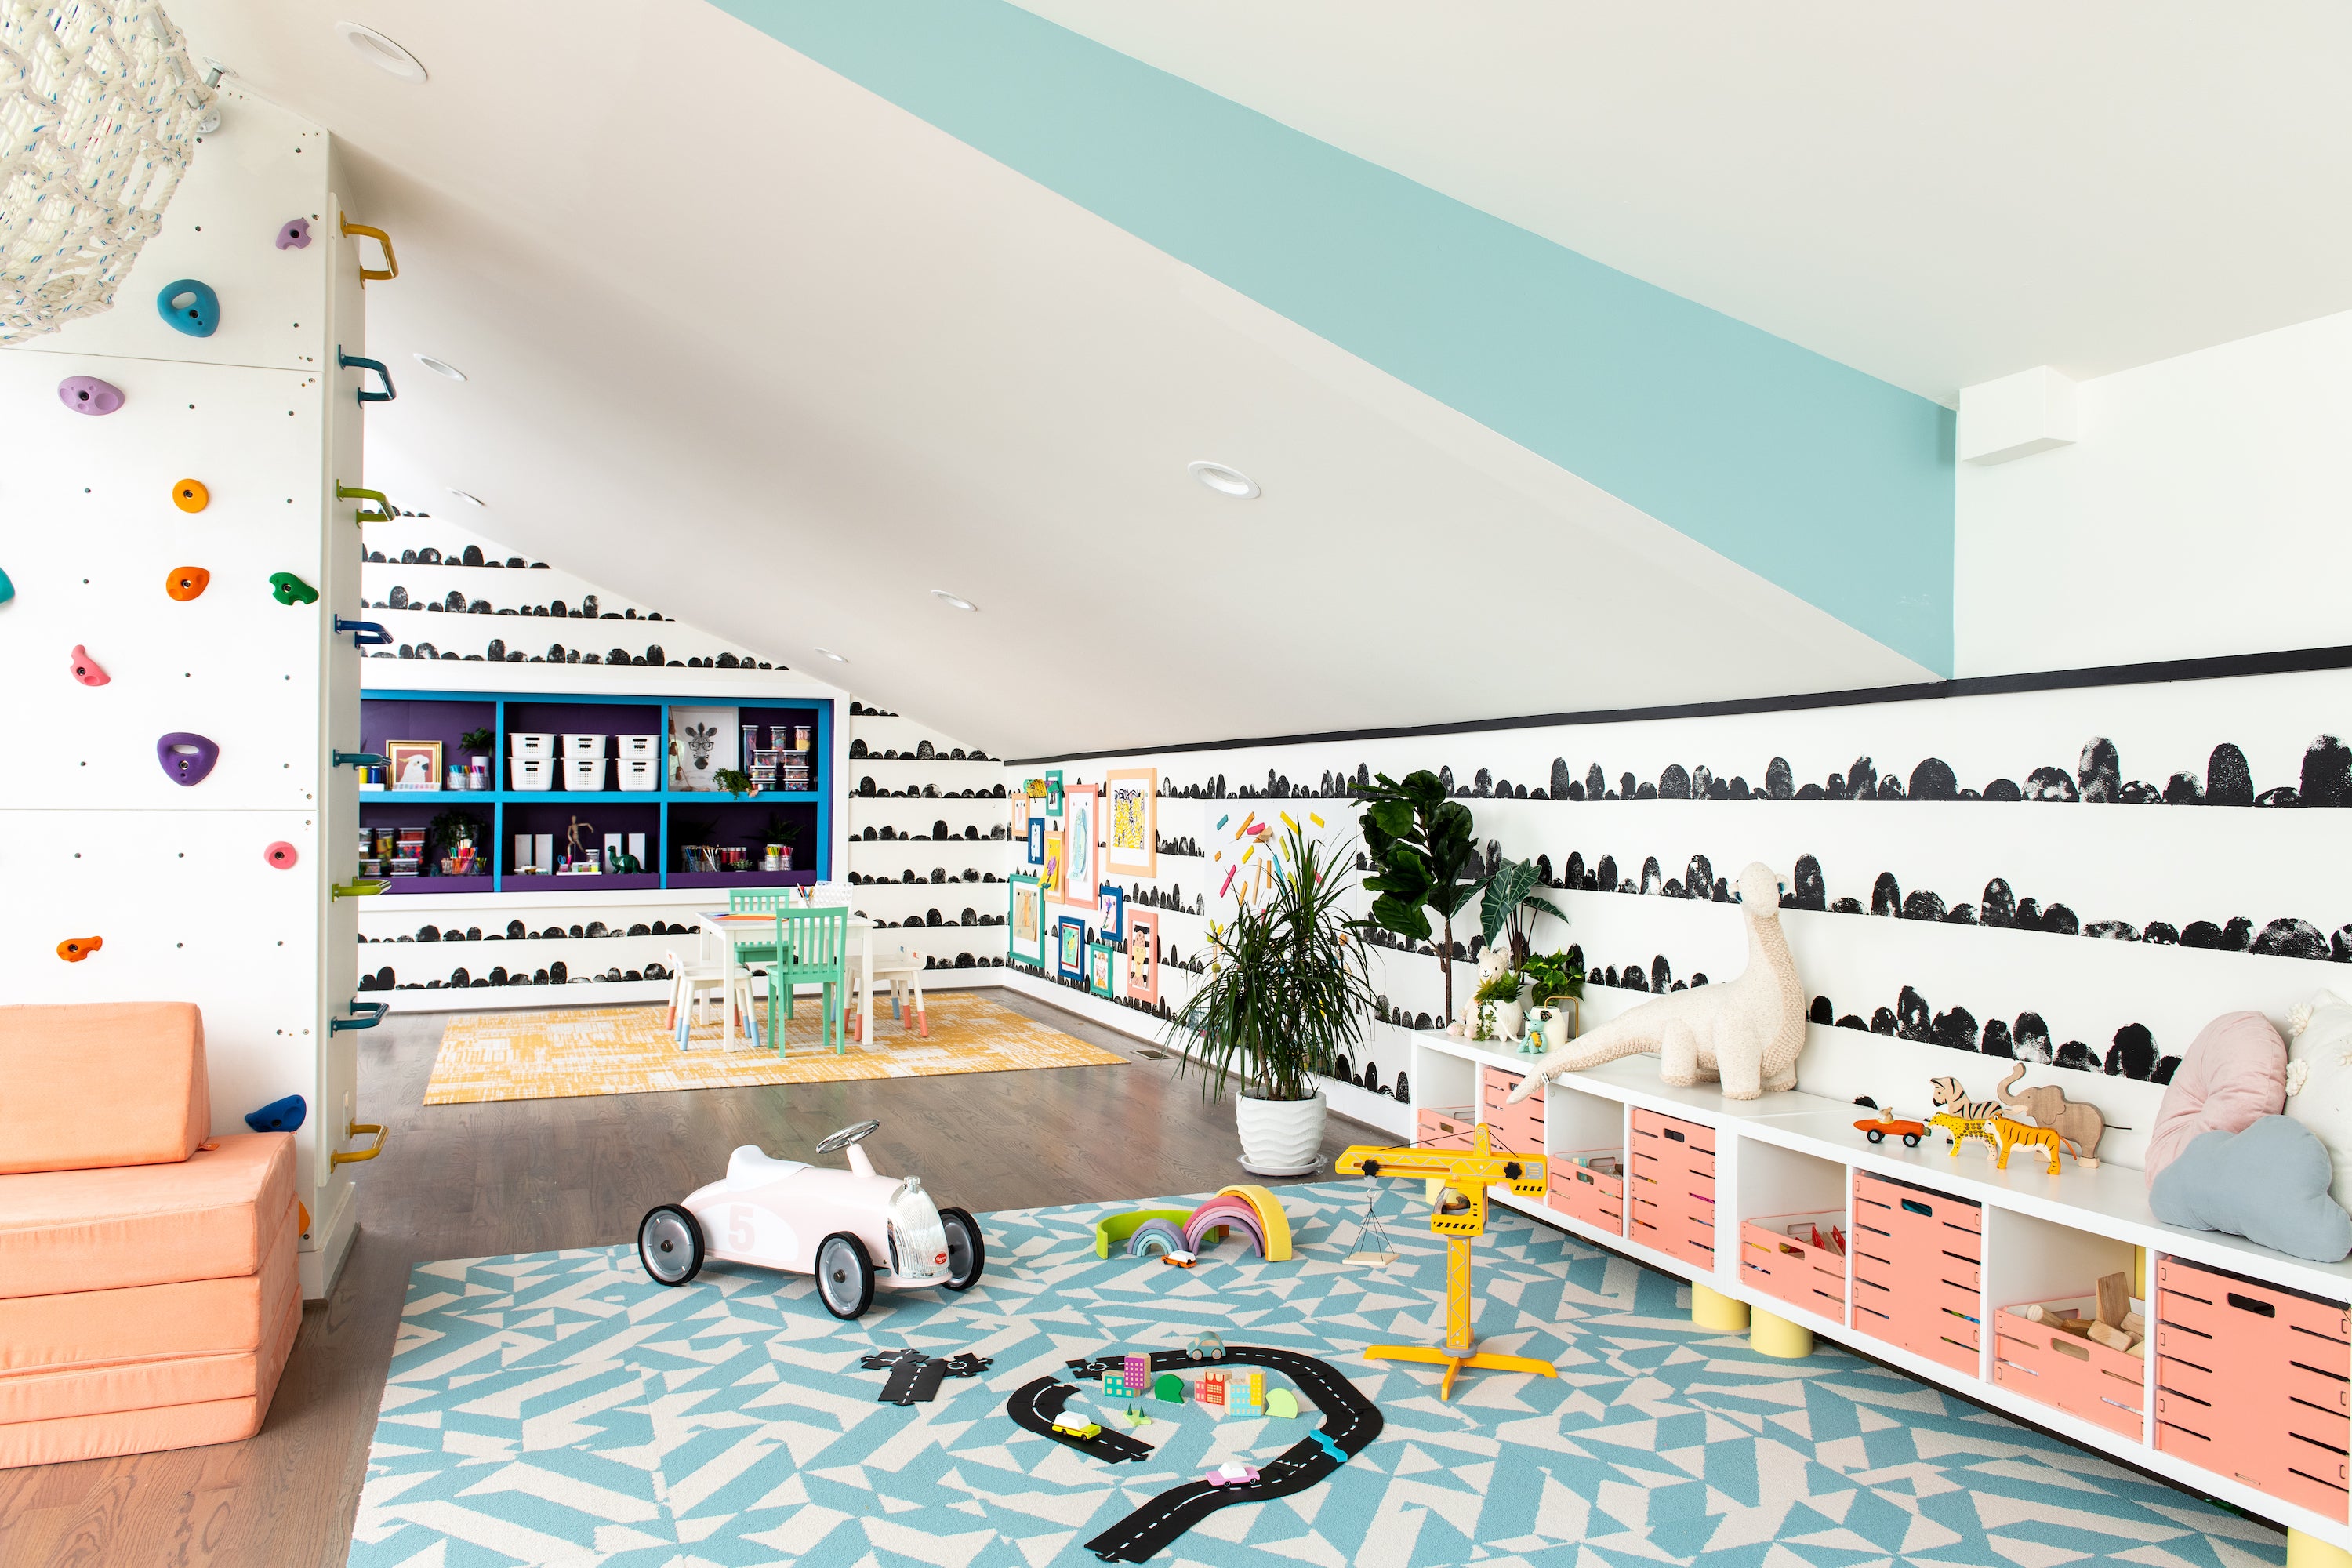 A grOH! designed playroom with low, accessible toy storage, open floor space, and brightly colored walls and floors.